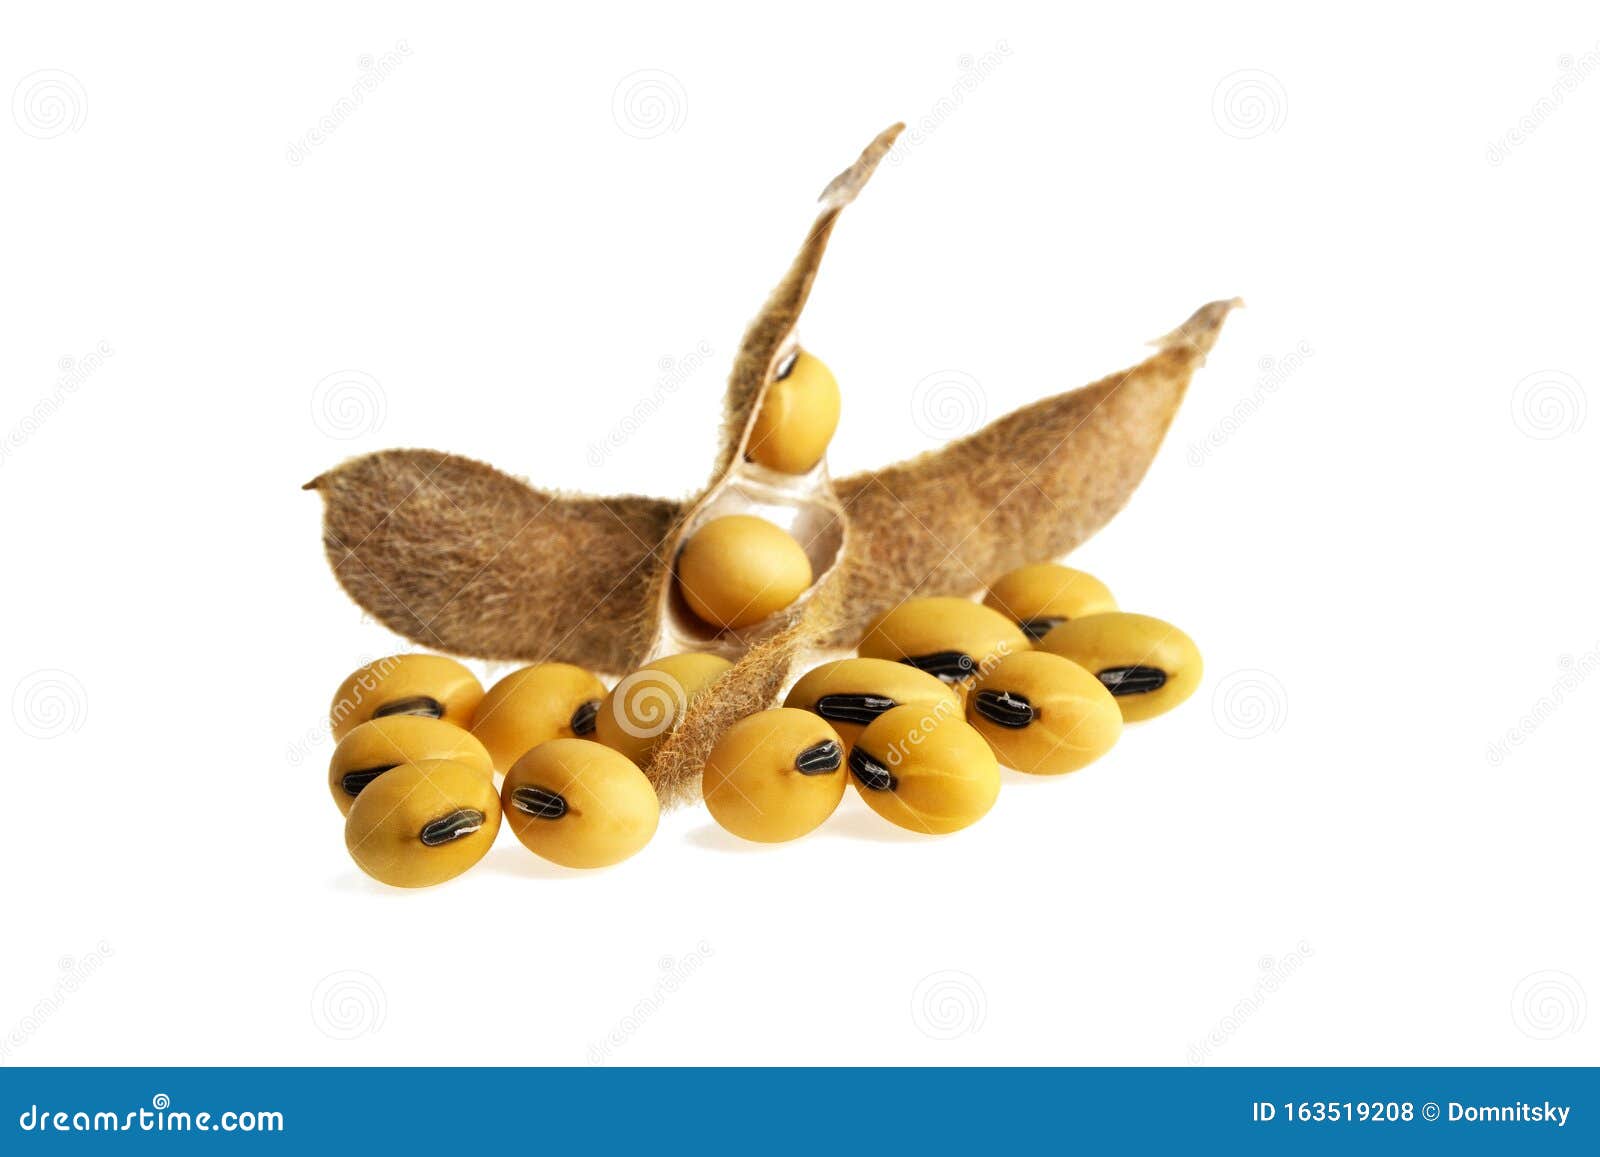 Soy Pods Isolated on White Background Stock Photo - Image of pods ...